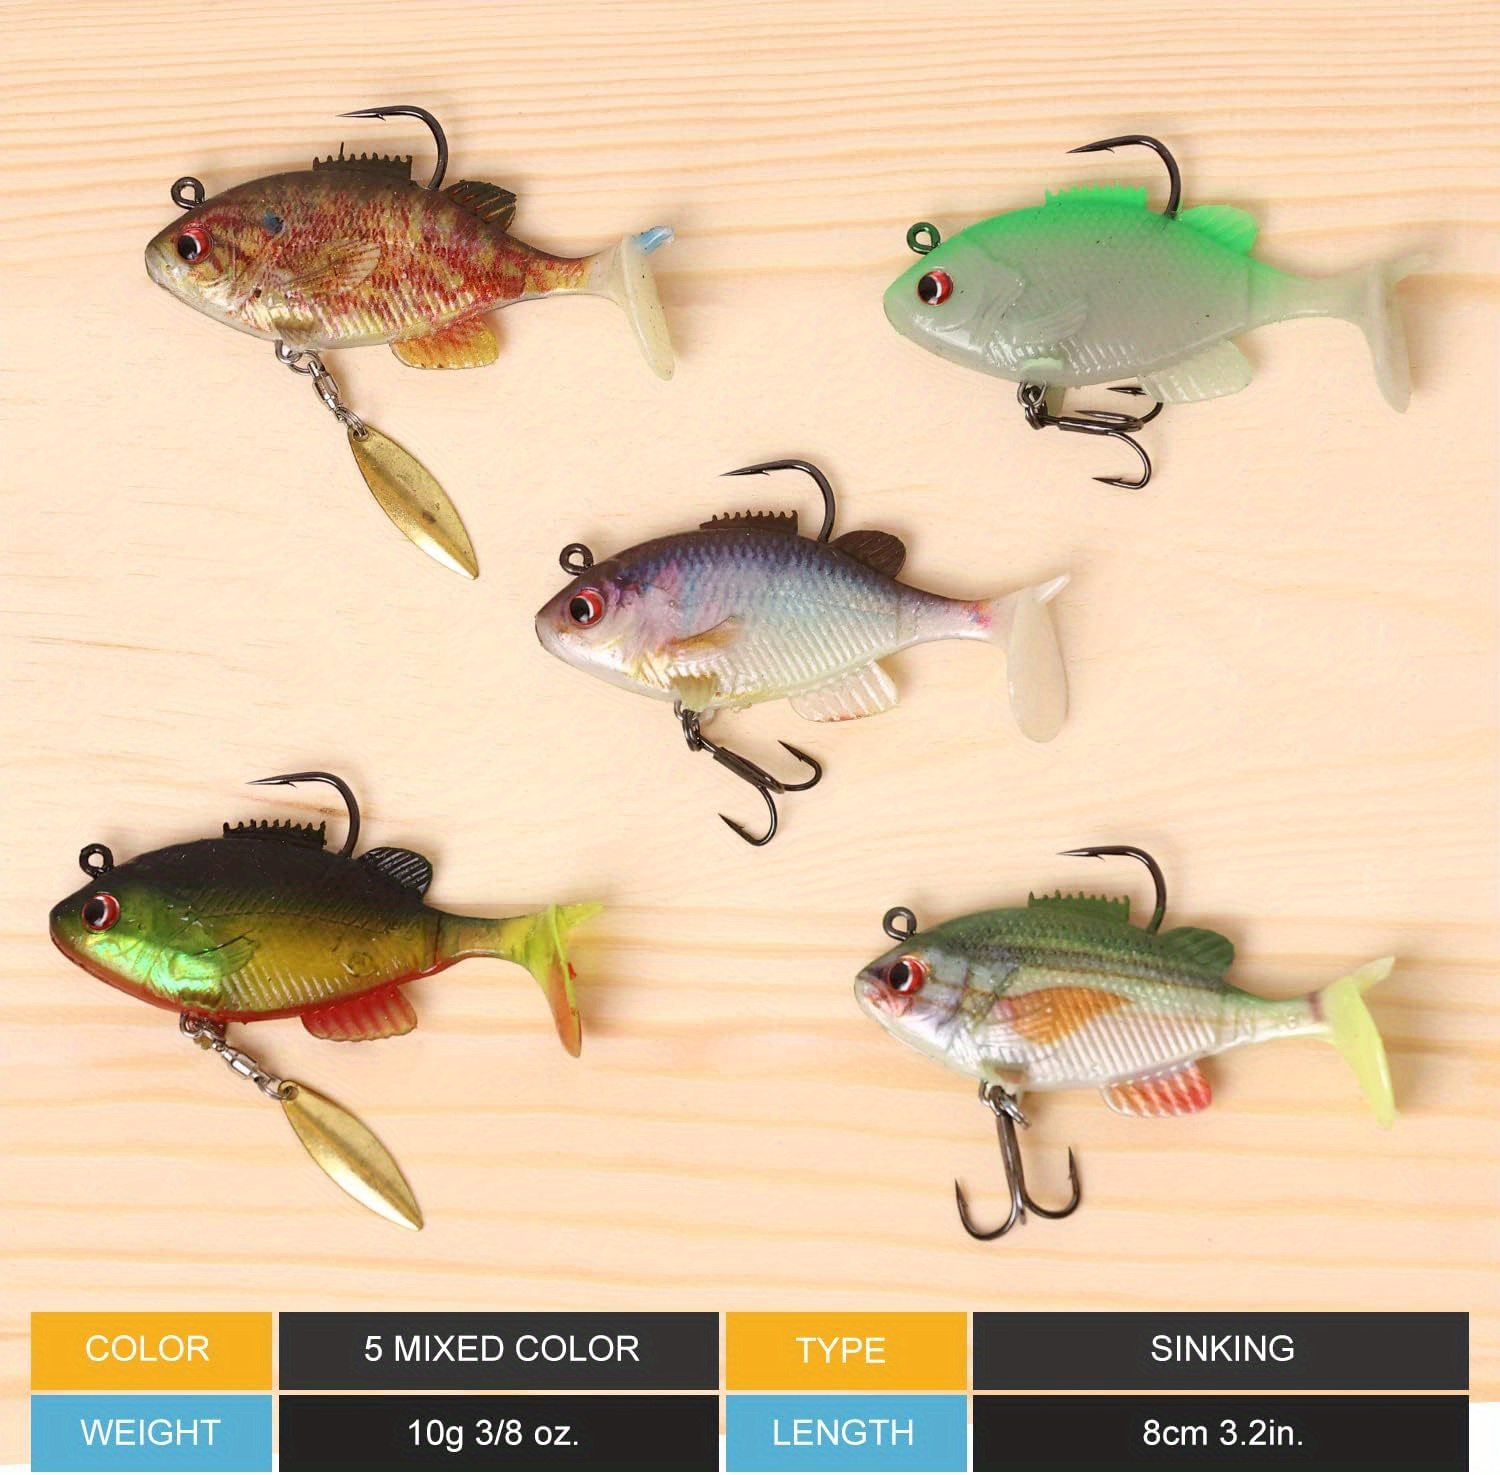 Yjfh-003 Soft Plastic Fishing Lures for Bass, Pre-Rigged DIY